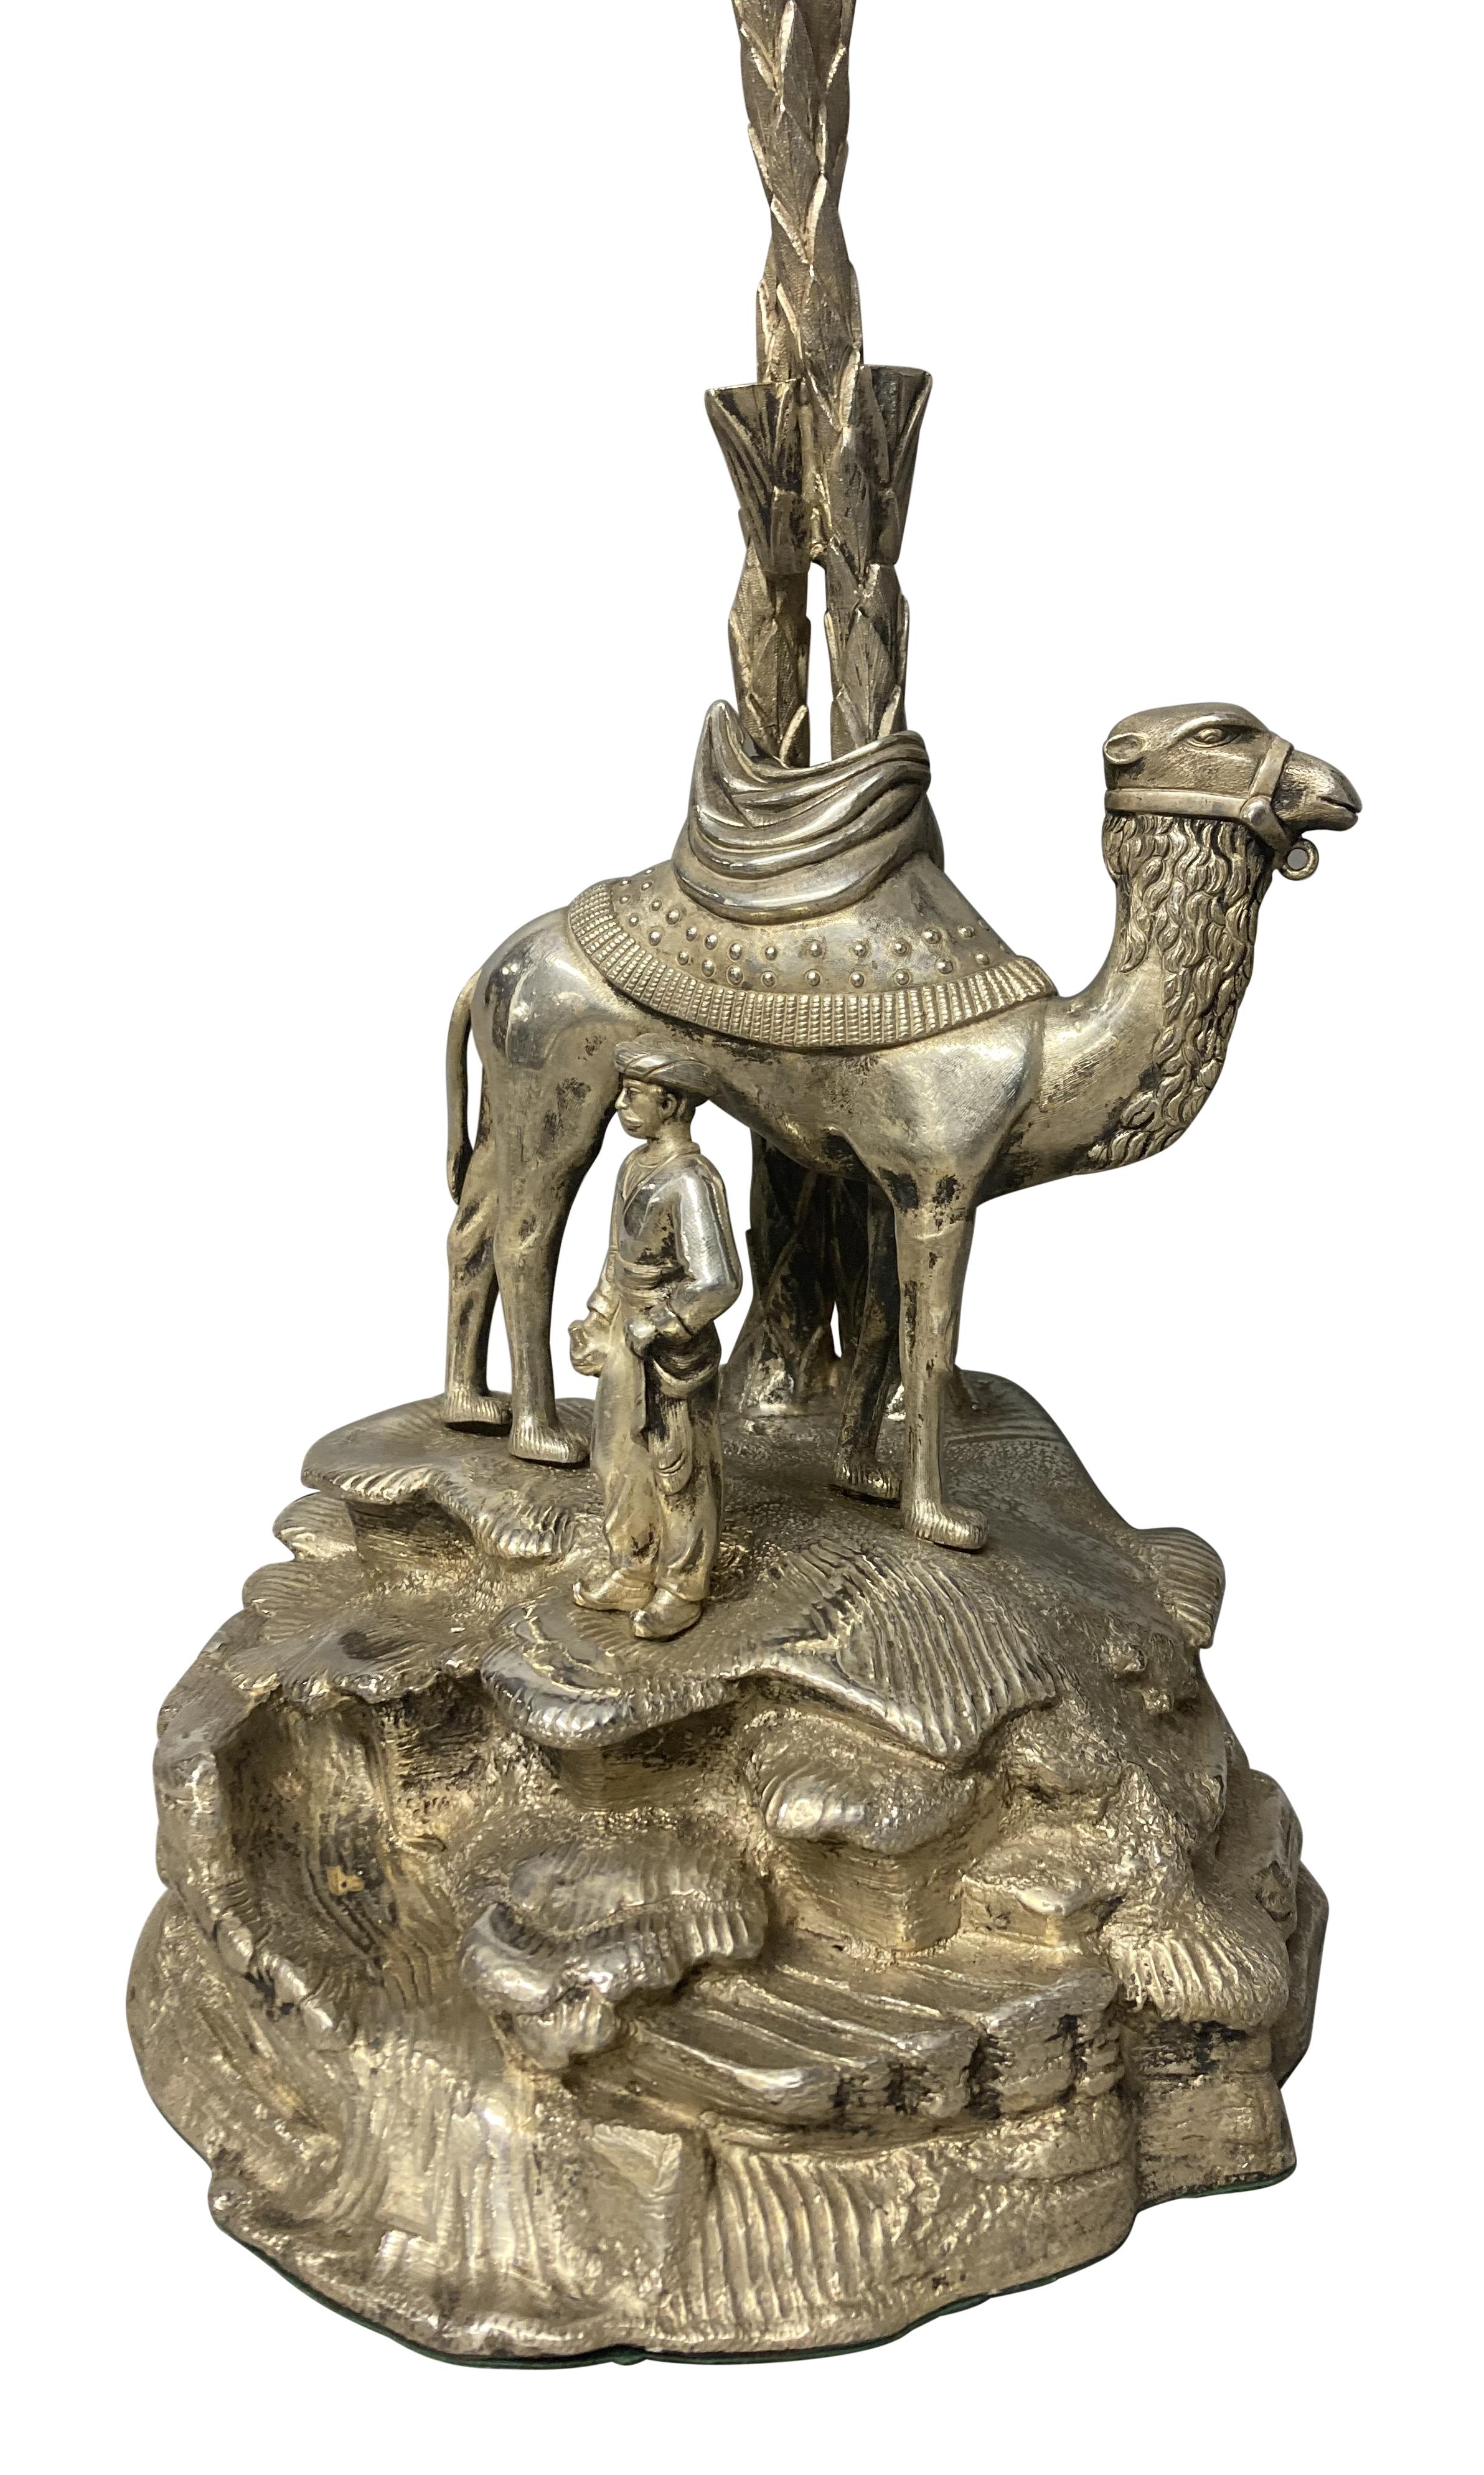 A large English silver-plated palm tree lamp, with a camel and figure at the foot of the tree. Well cast with good patina, probably by Elkington.